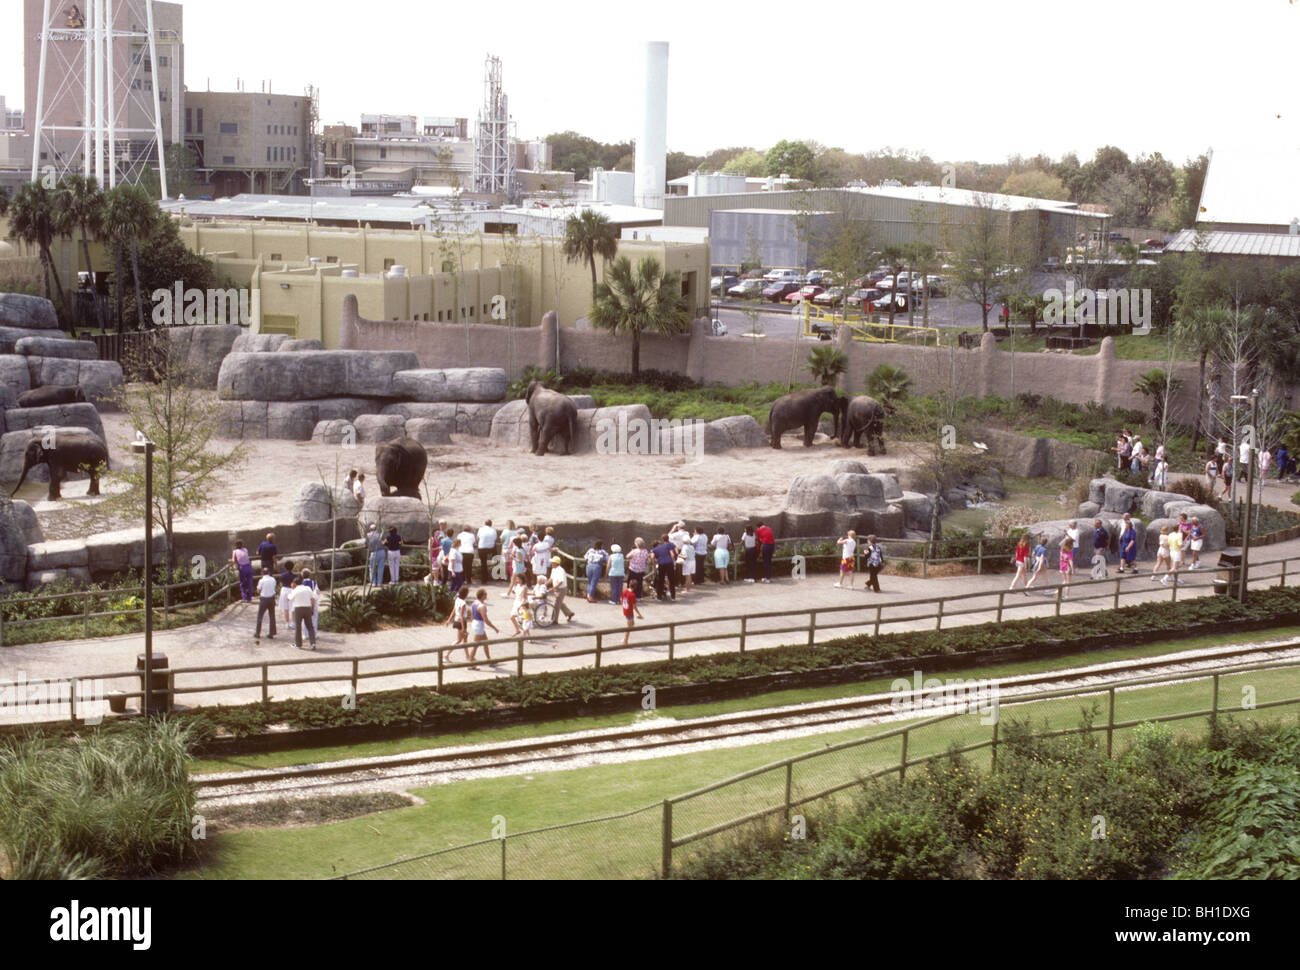 Elephants in zoo next to Busch Beer brewery. Kodachromes of Florida tourist sites during the 1980s. Stock Photo